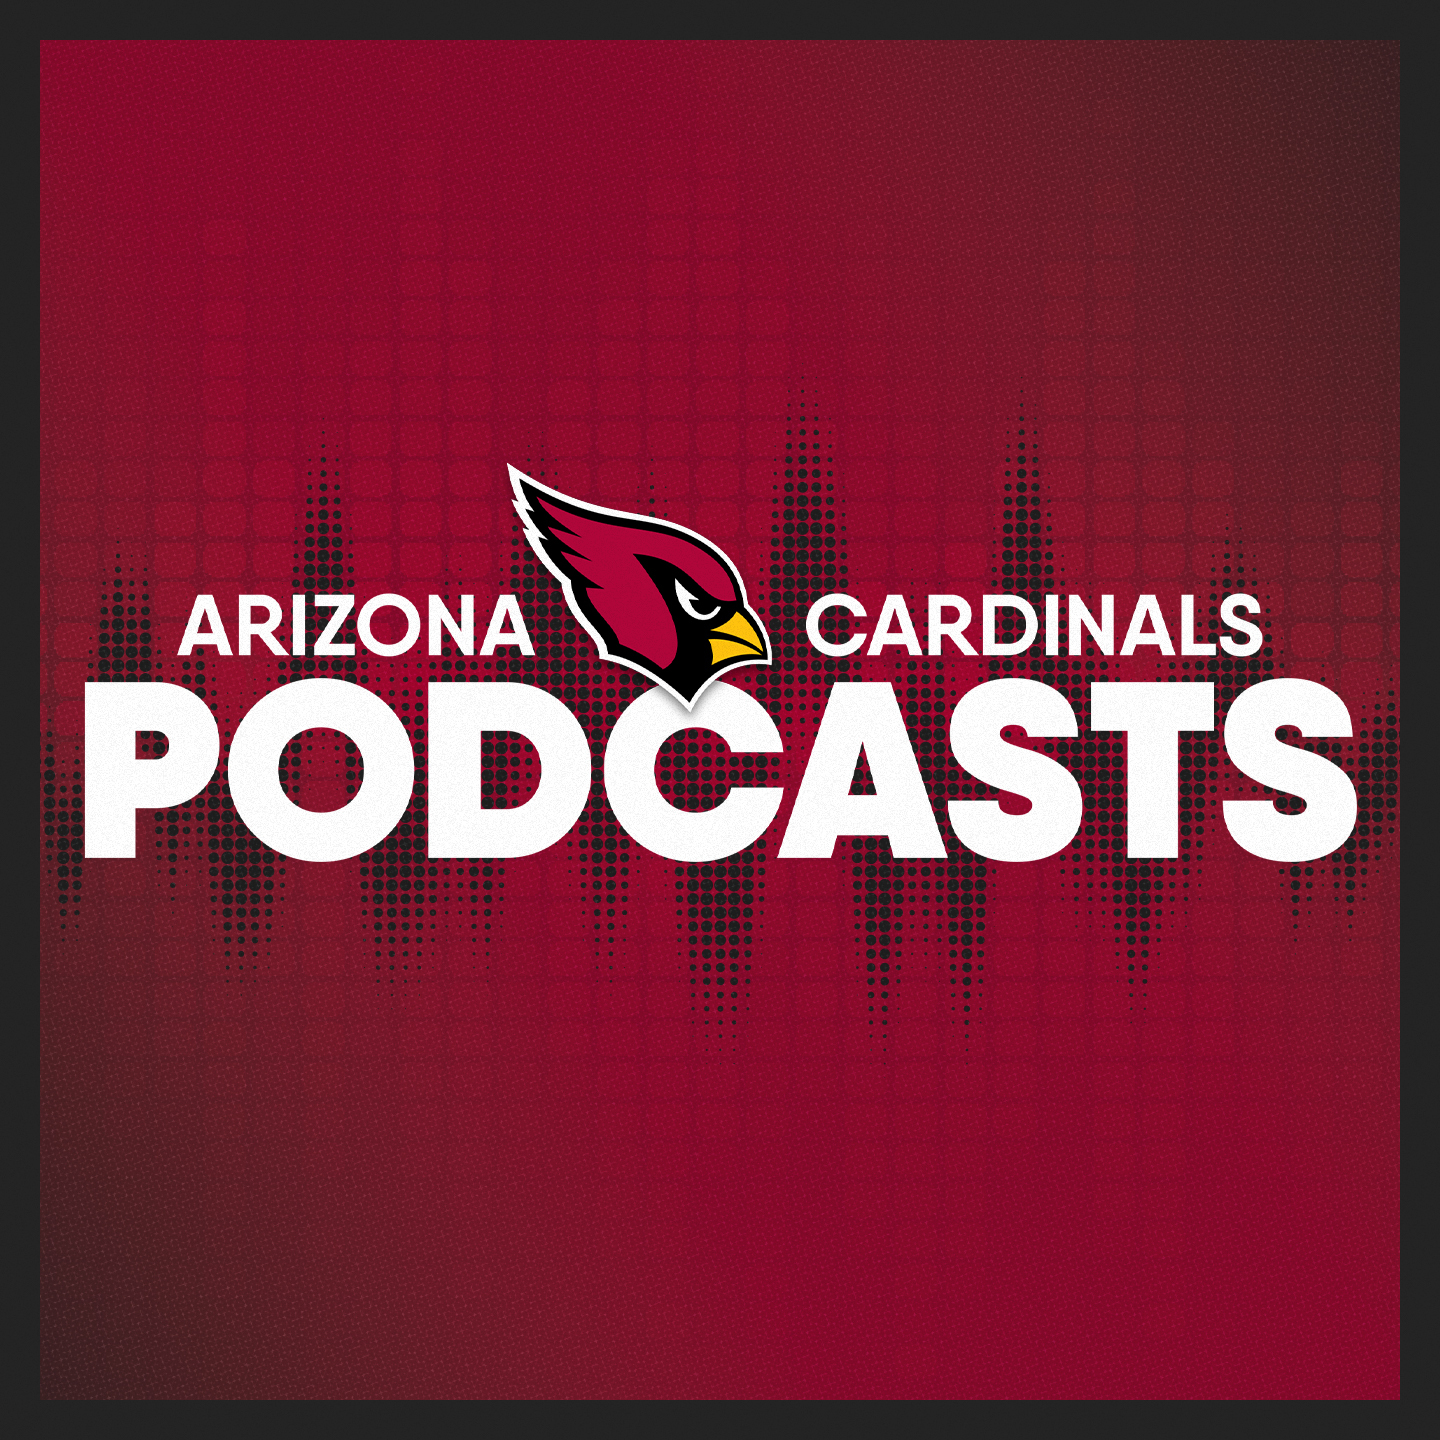 Cardinals Cover 2 - The NFL Draft Countdown Begins